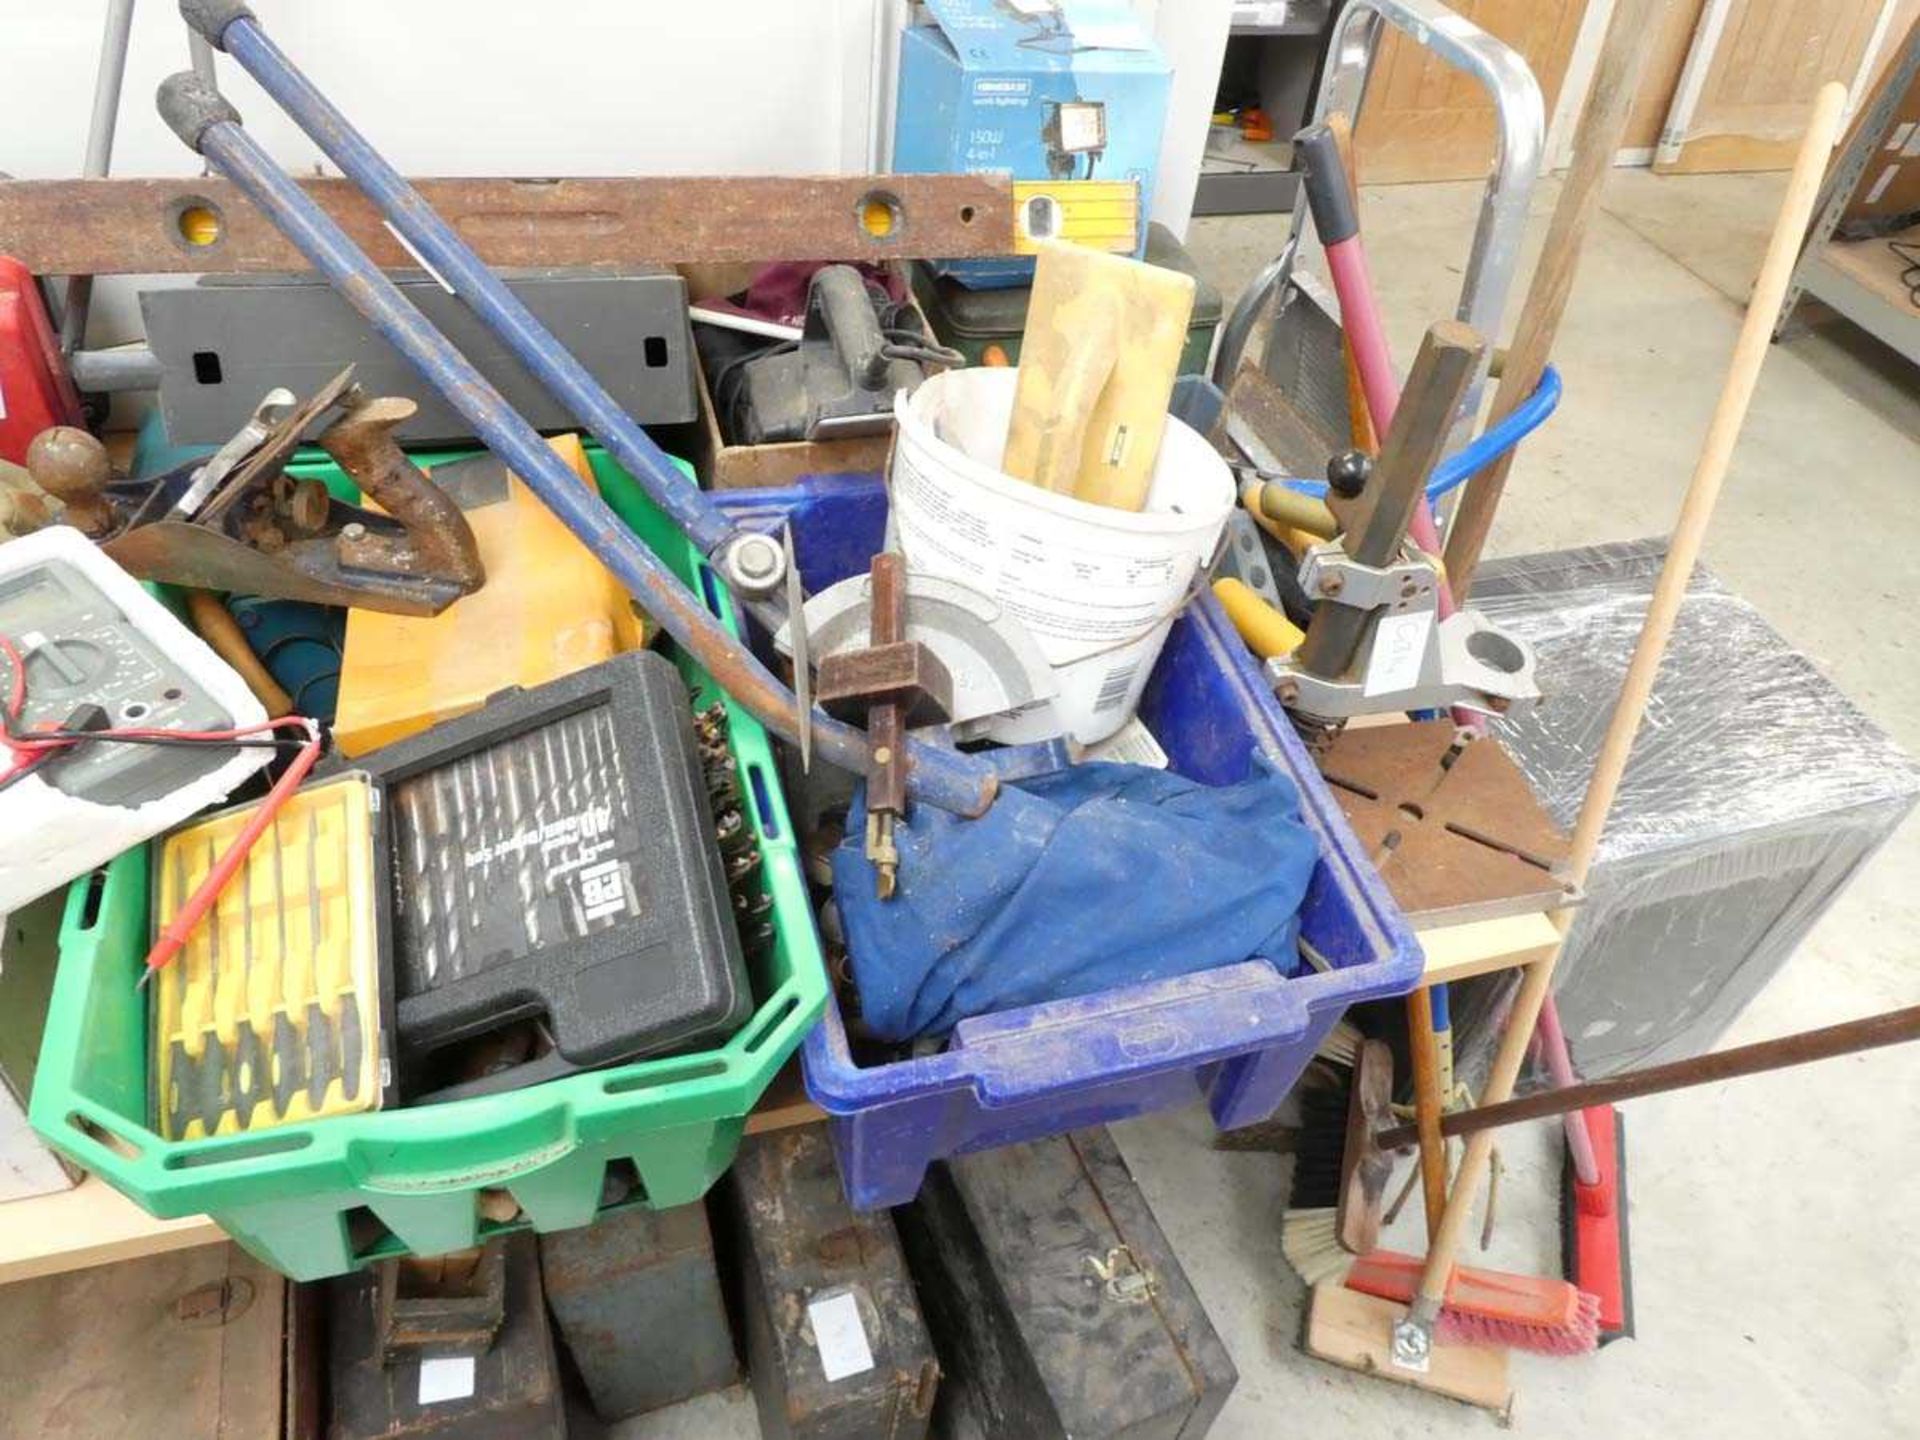 Tabletop and undertable collection of various tools, to include heat guns, electric planers, - Image 4 of 8